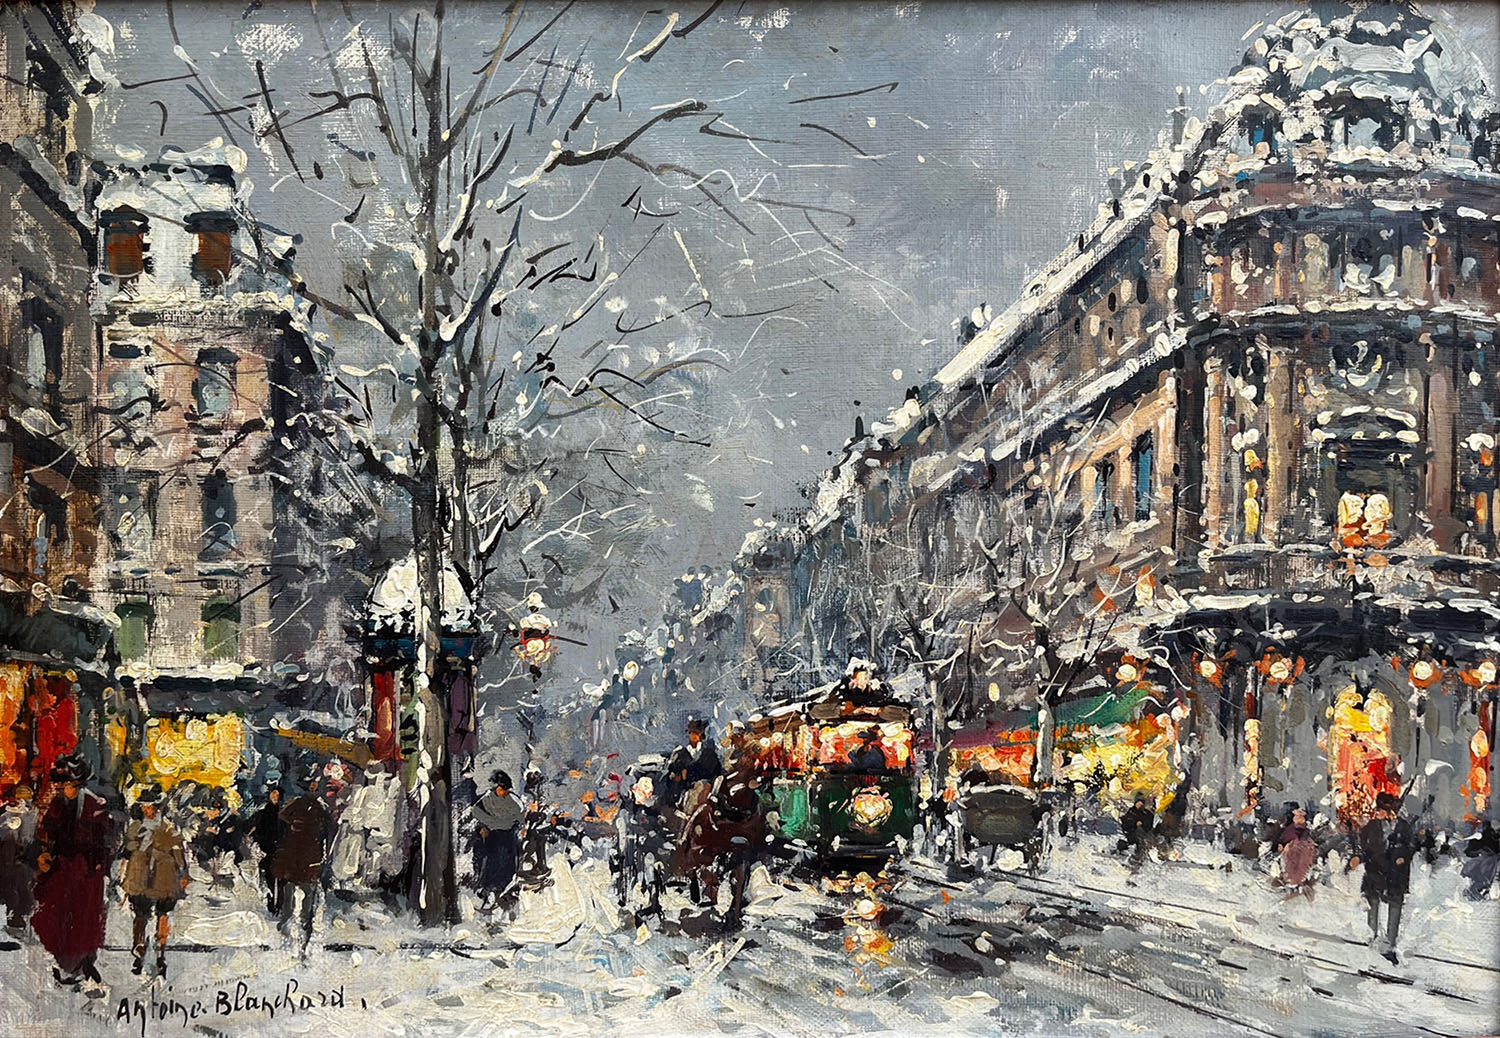 the vaudvlle theater in paris, people walking on snow covered street and omnibus